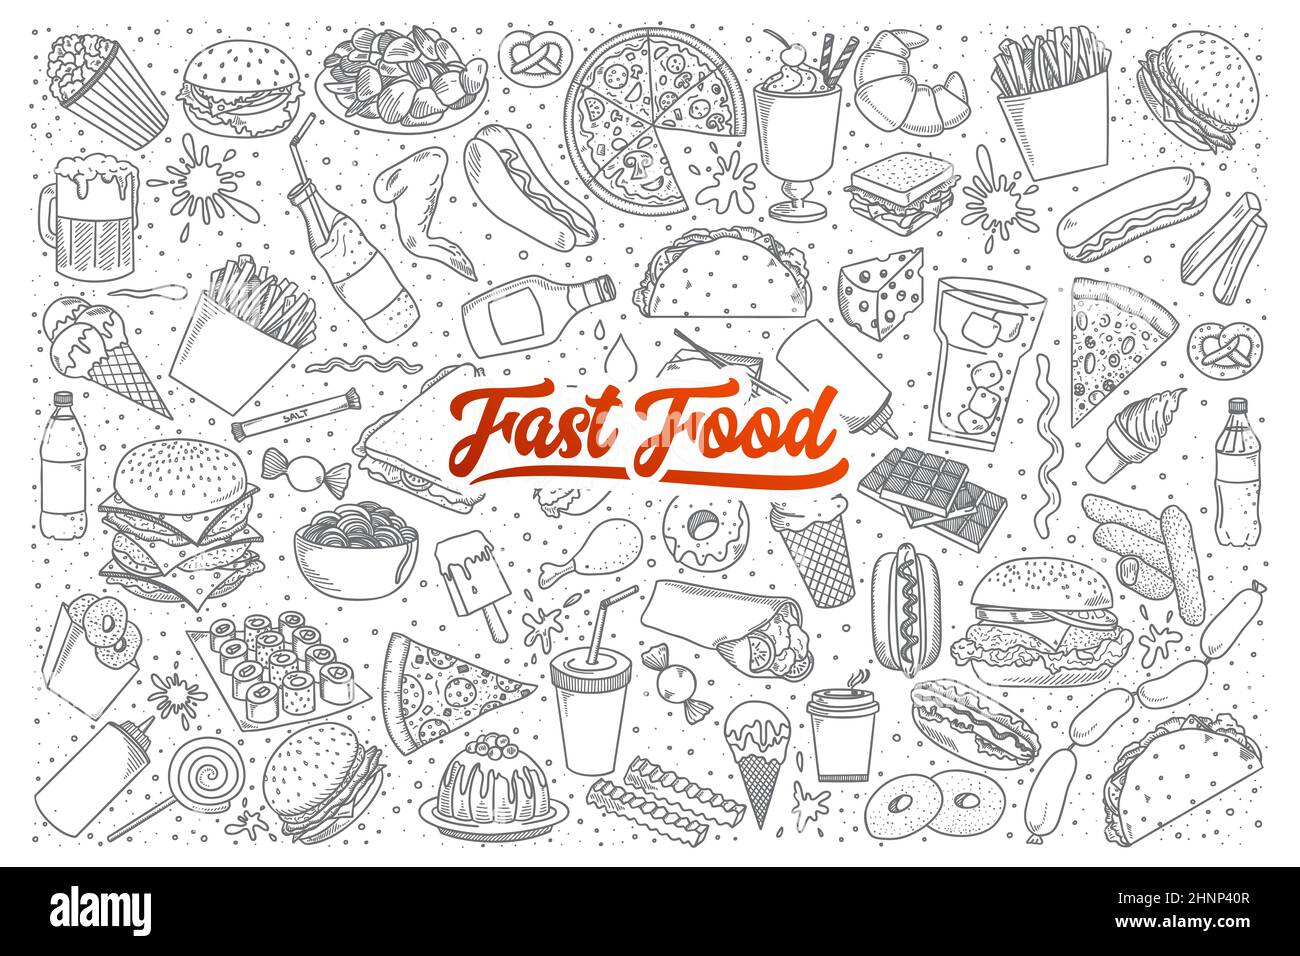 Hand drawn set of fast food doodles with lettering in Stock Photo